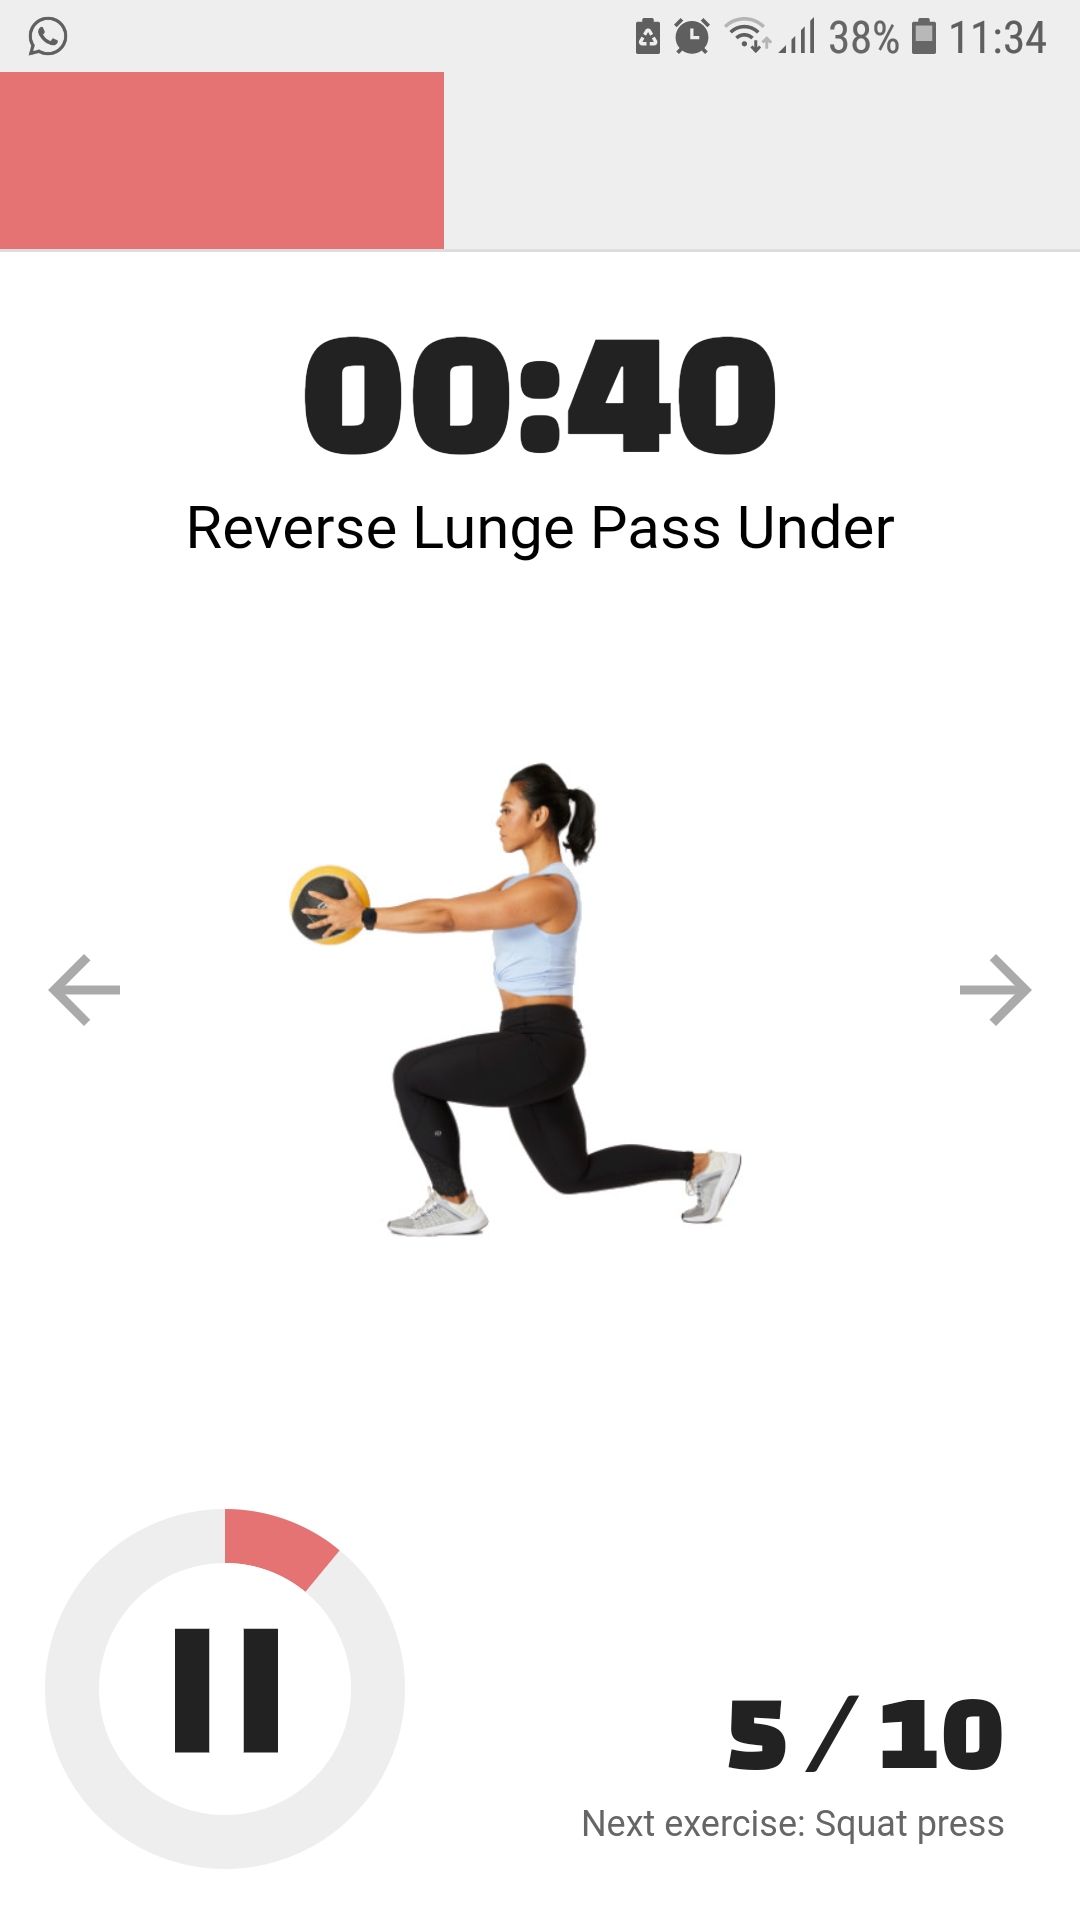 Stay Fit With Samantha Medicine Ball Exercises mobile fitness app lunge